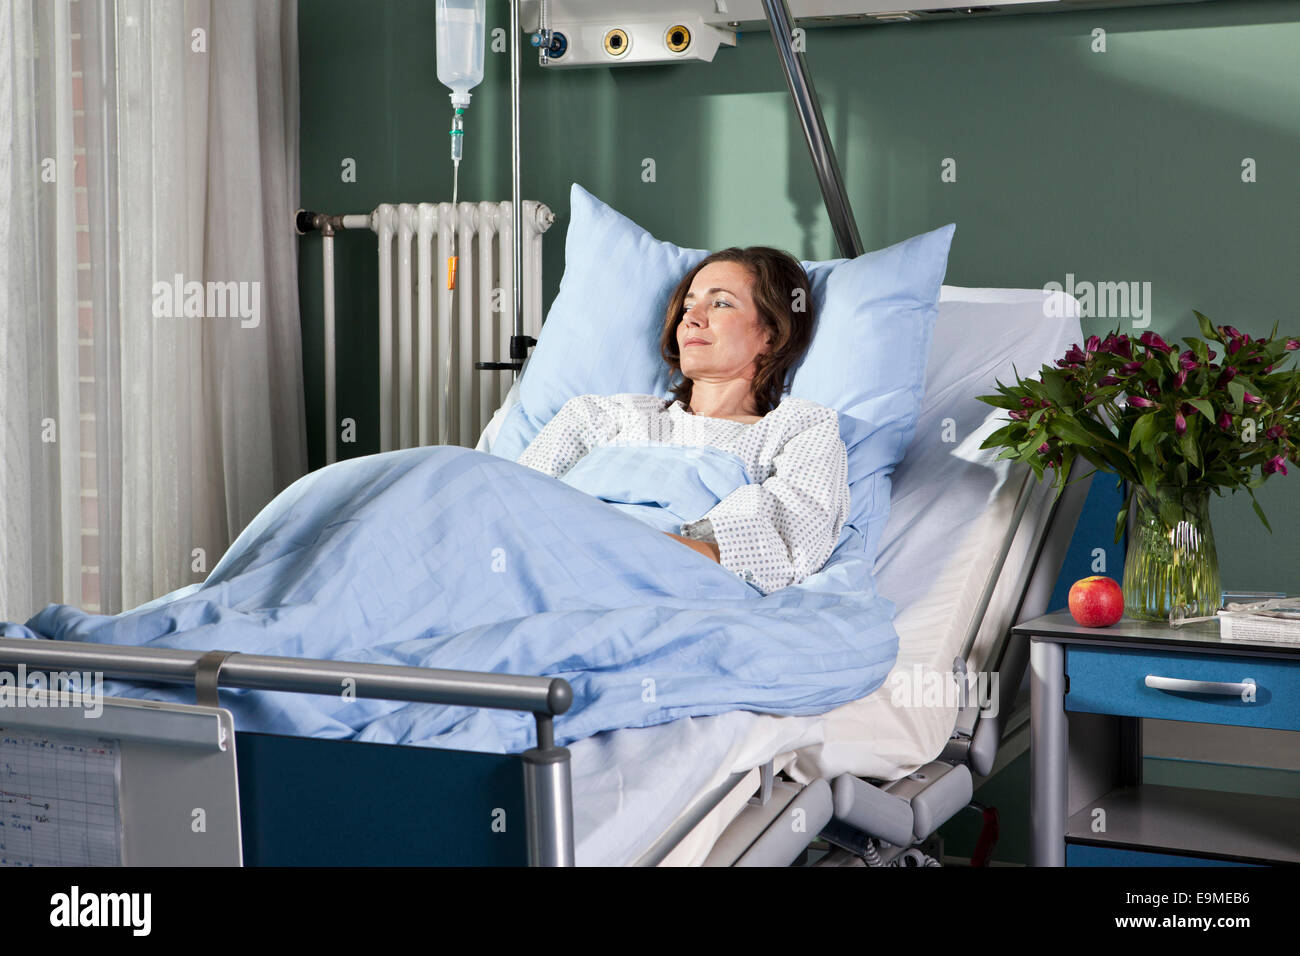 A woman lying in a hospital bed Stock Photo - Alamy